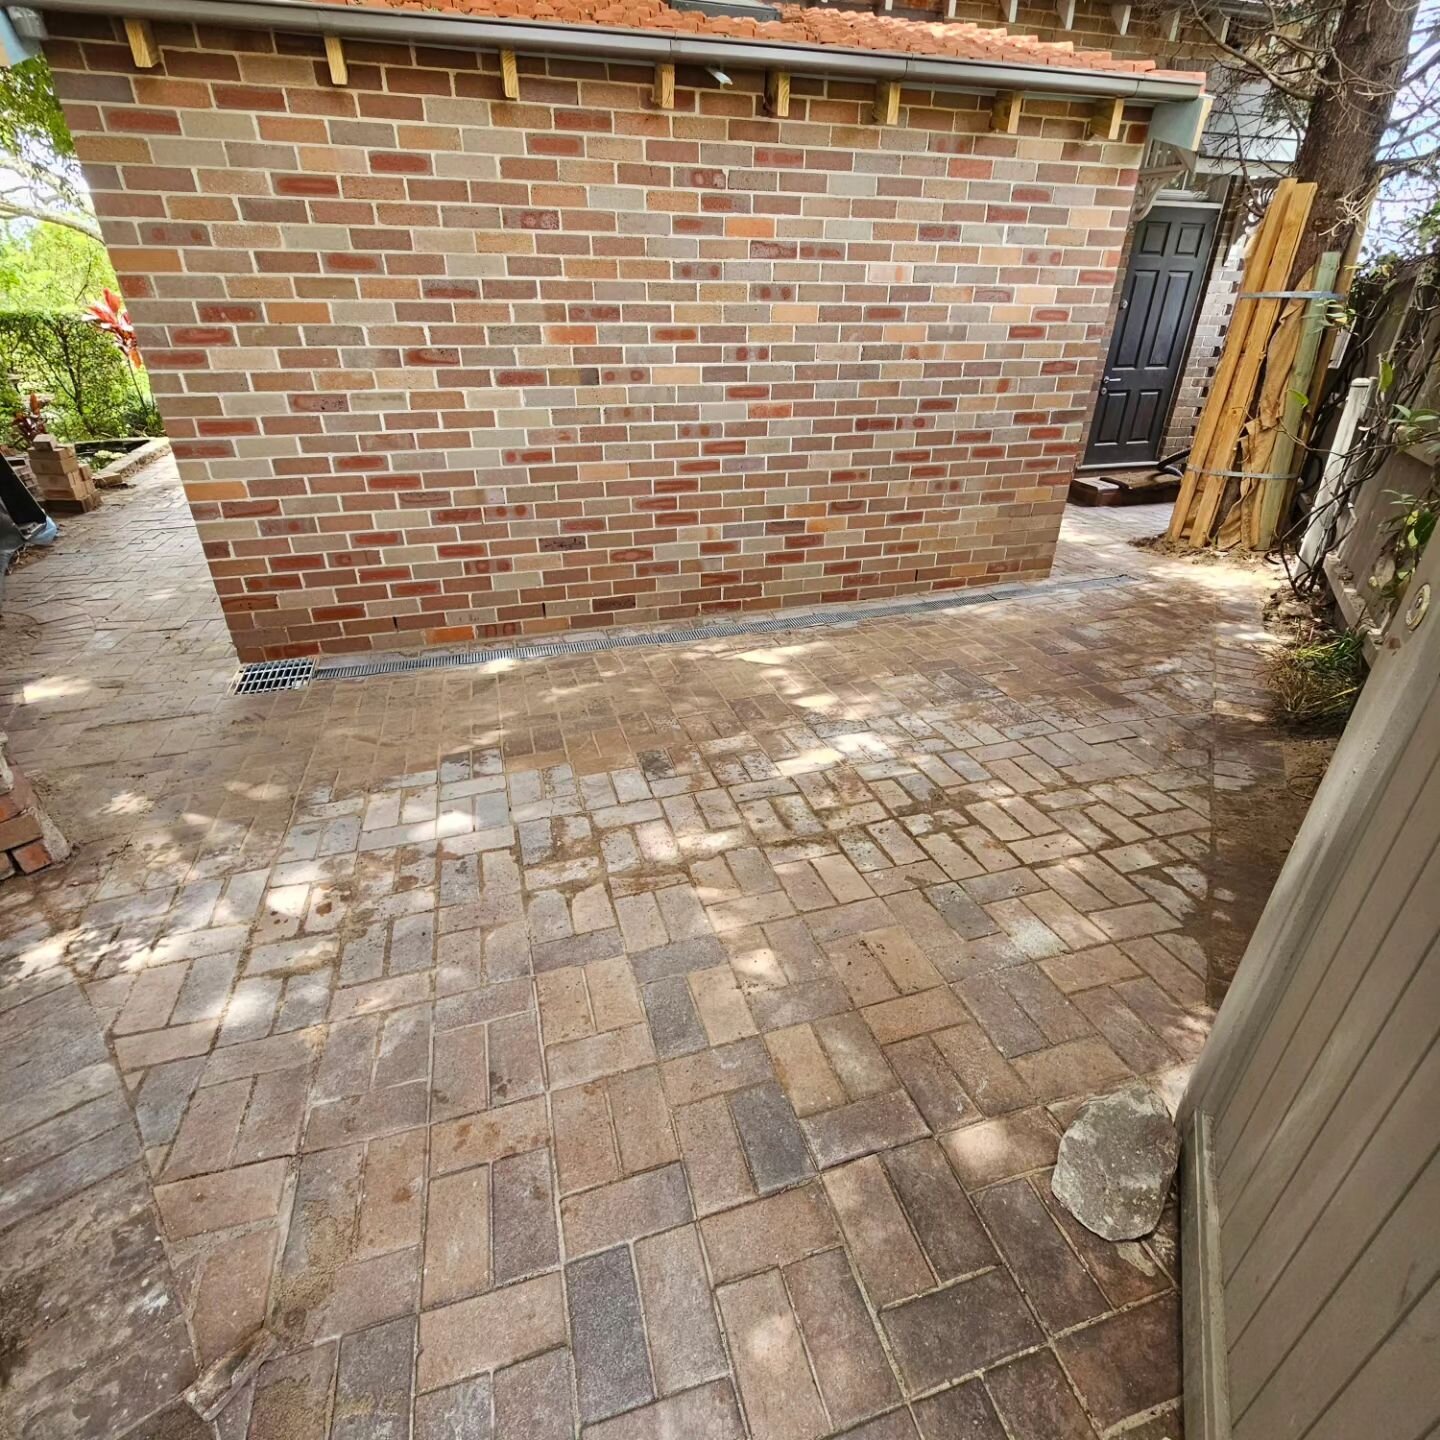 Finishing off this new extension for the builder to fix and re level this paving area
A Saturday of hard grafting but Magnolia Landscapes got it done 👍👌🏡😁
#paving #landscaping #horticulture #sand